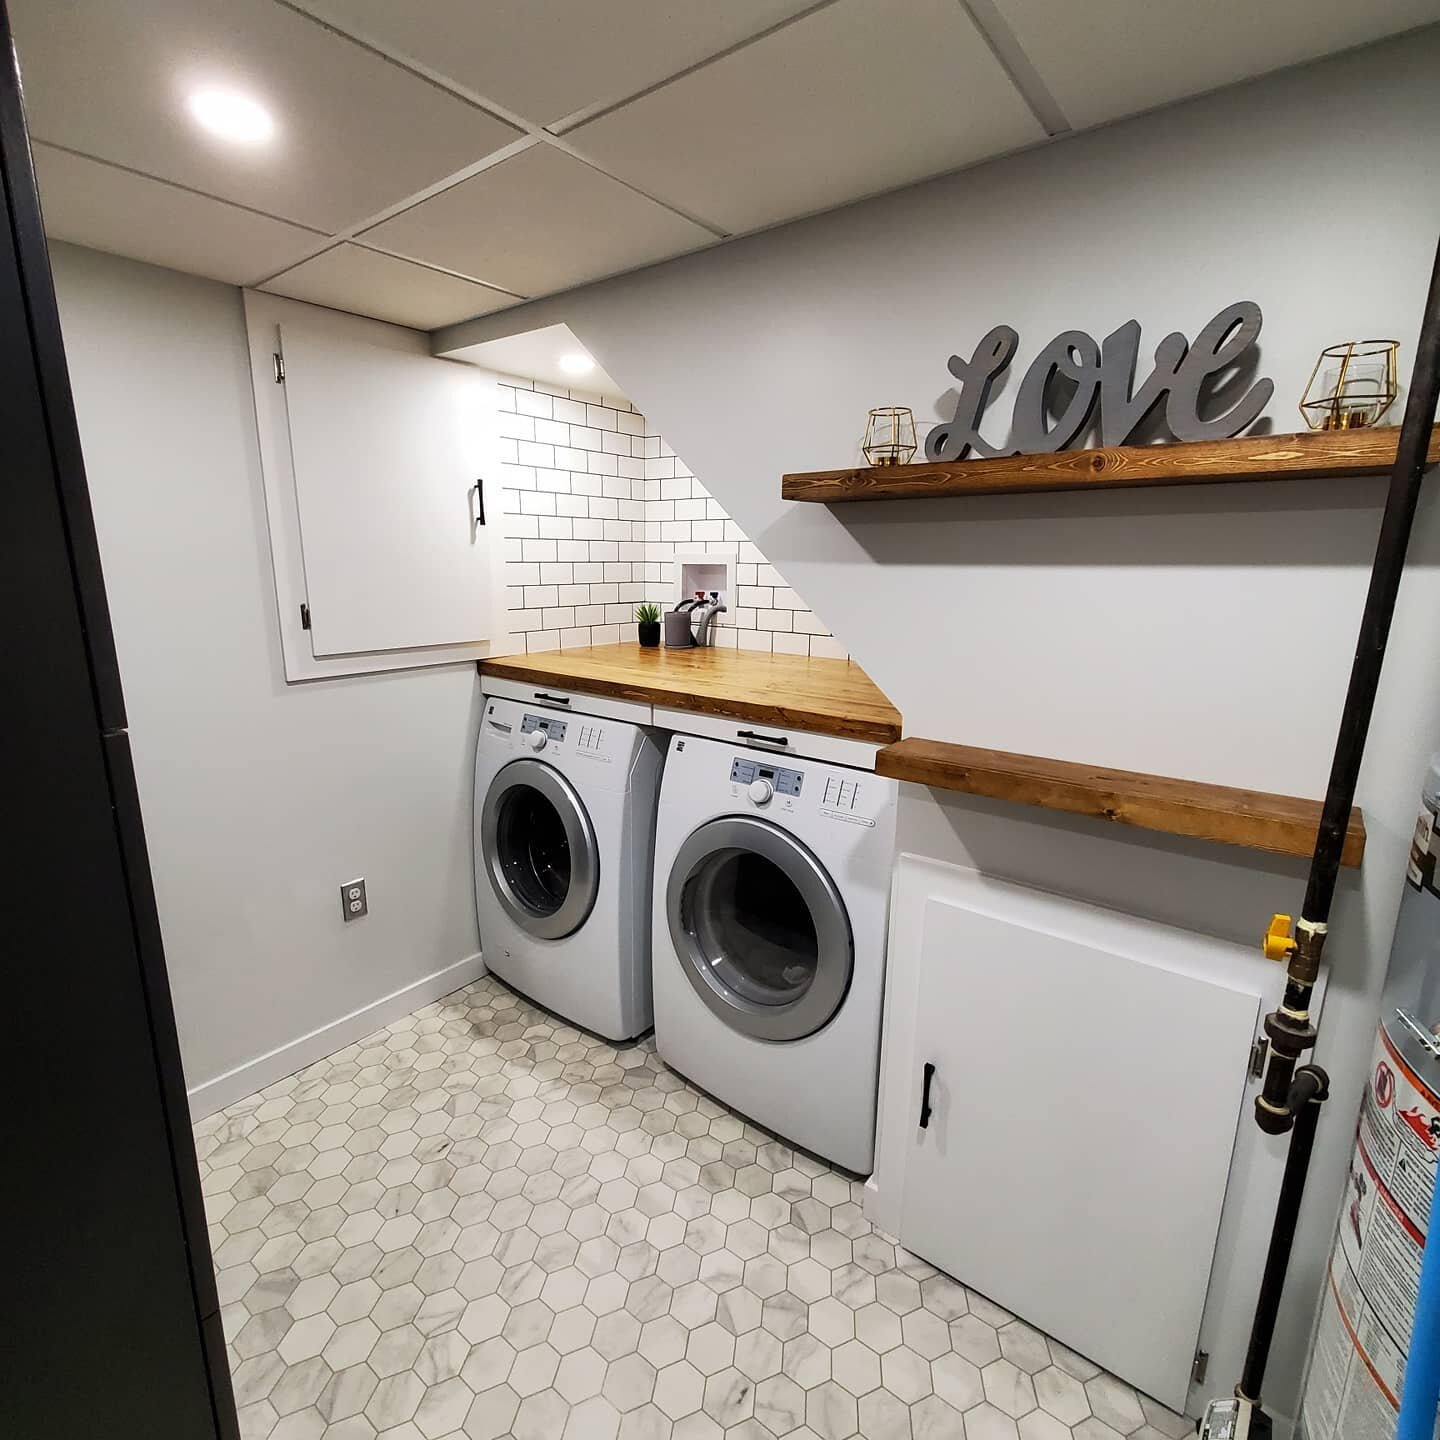 This laundry room turned out great! Built in sliding drying racks, custom countertop with matching floating shelves, hexagon flooring finished off with some subway tiles. What a big difference from the unfinished laundry room that we started with!
.
